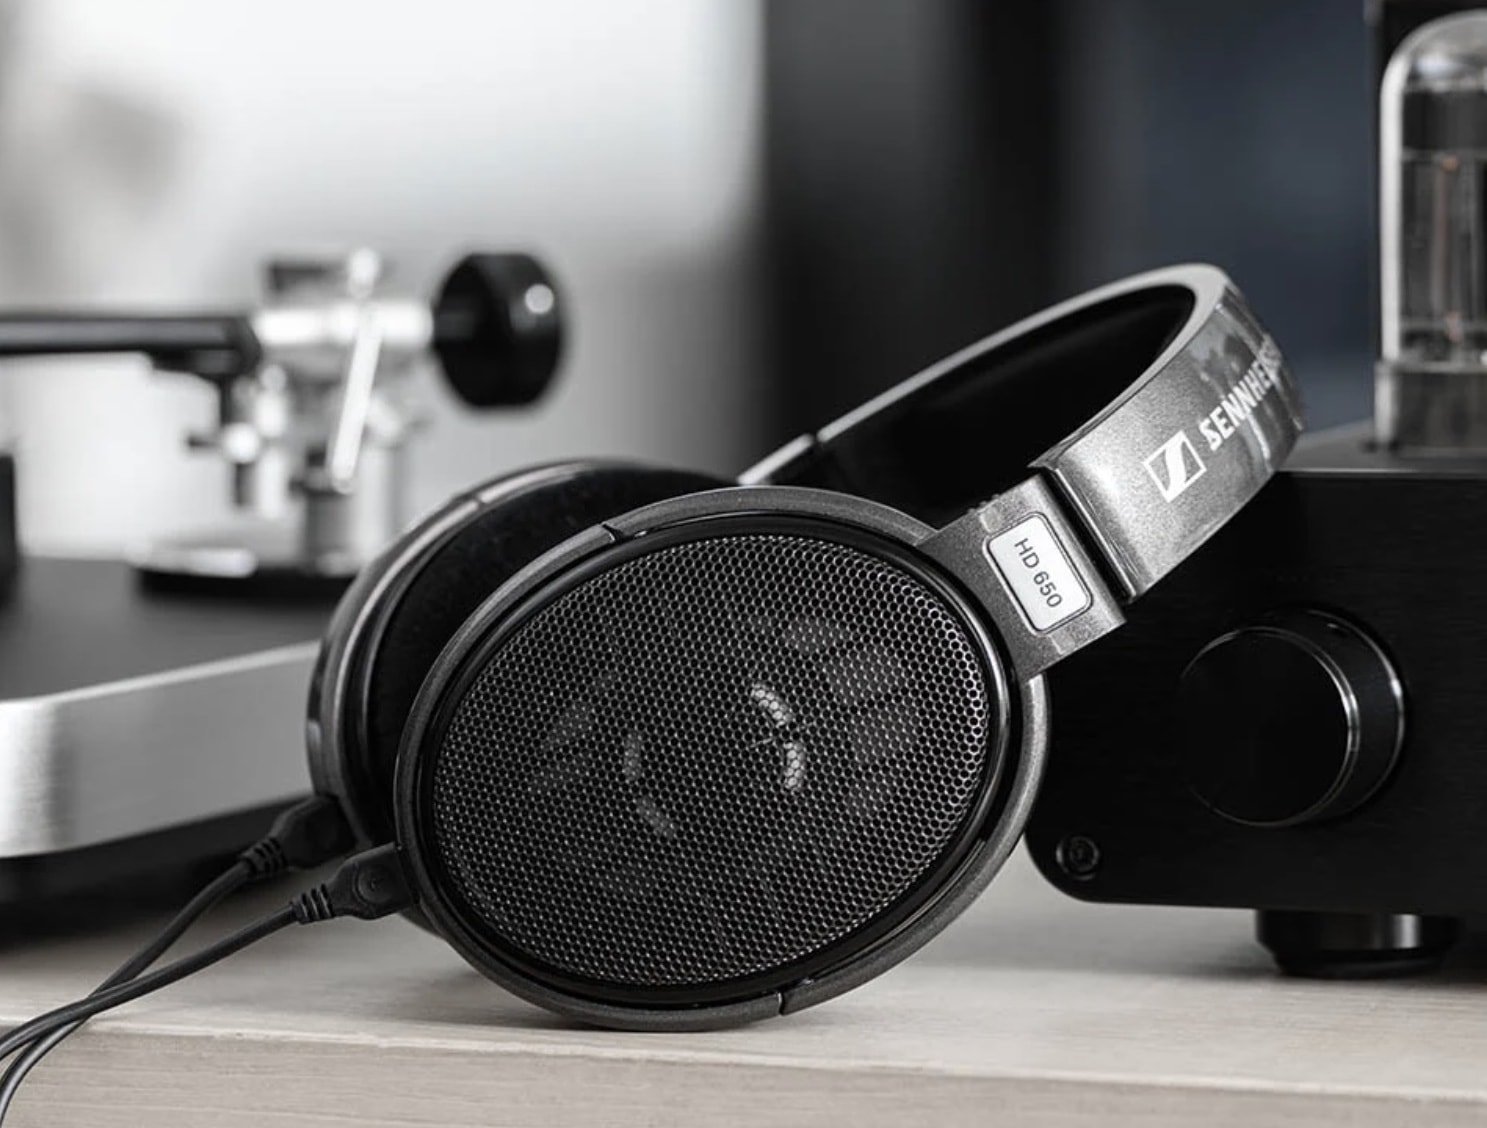 Review: Sennheiser HD650 – Answering Questions About This